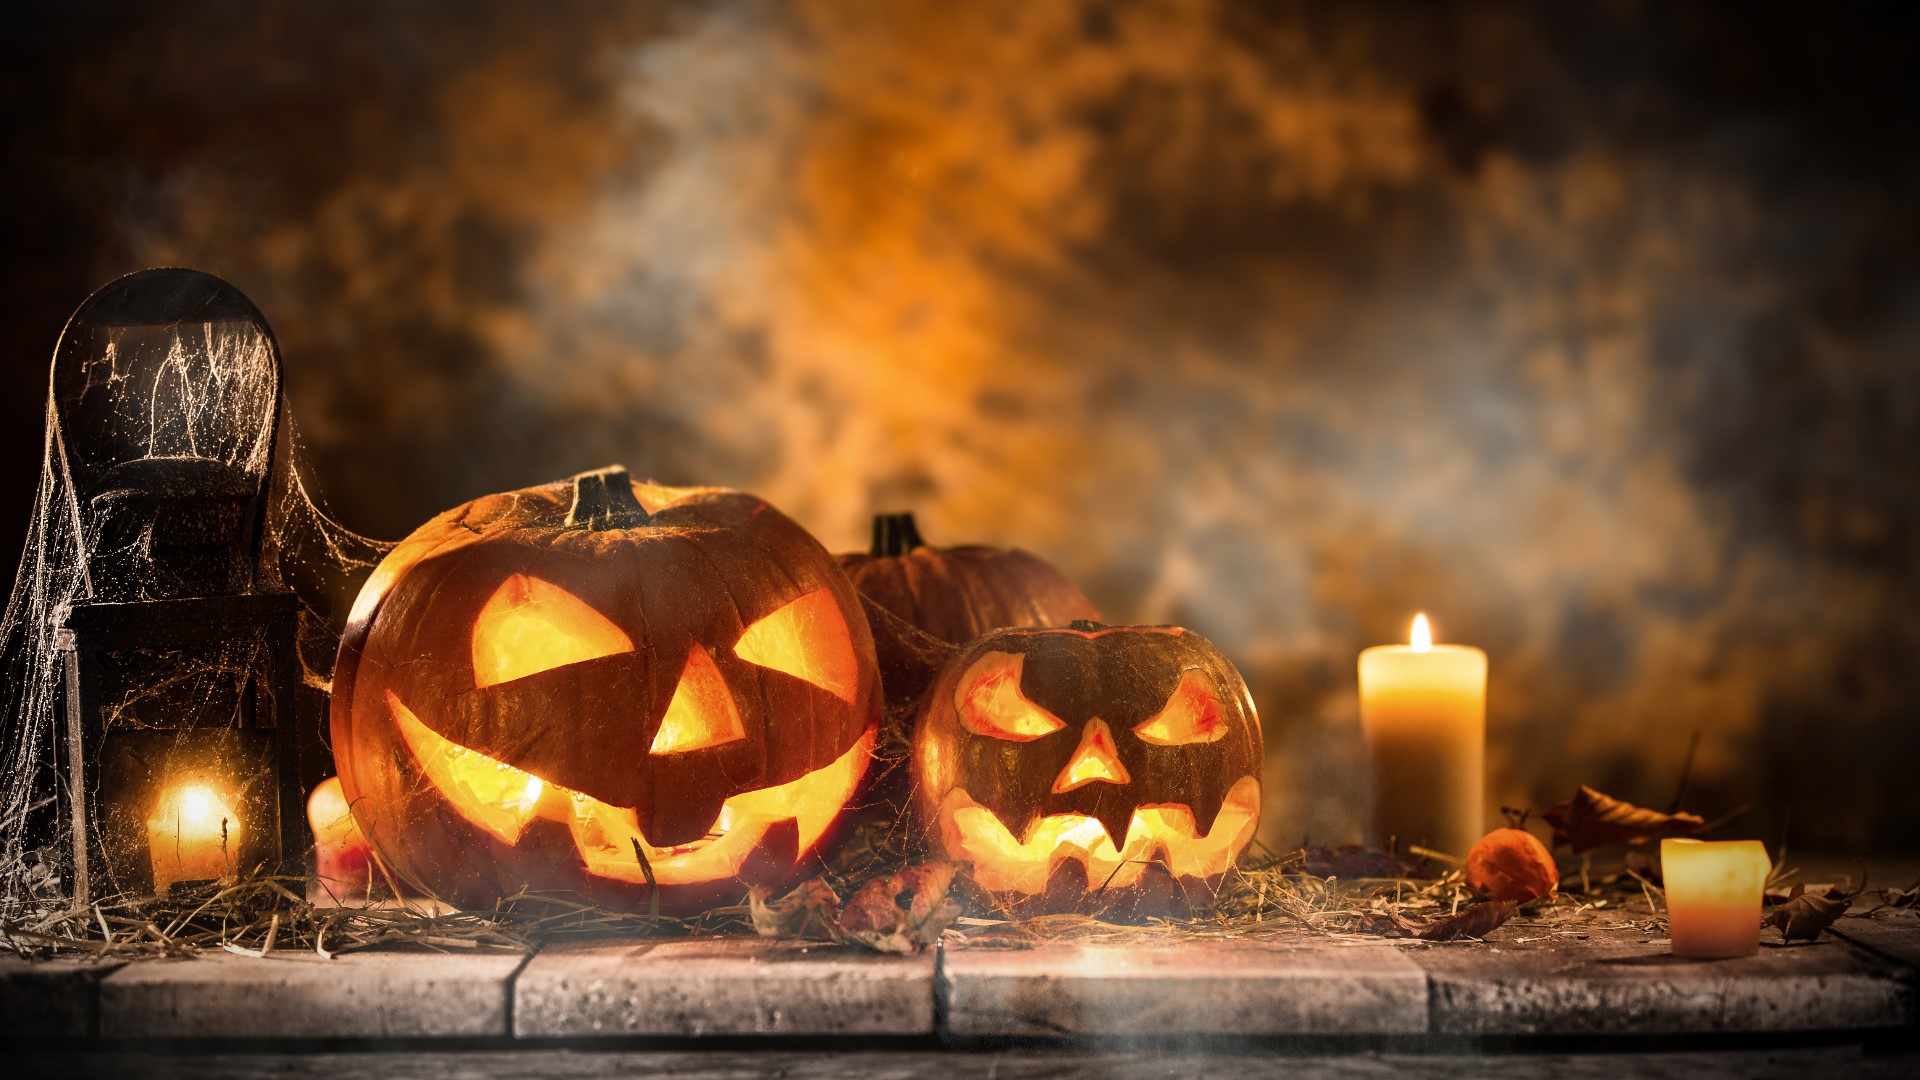 From Gettysburg to Lancaster County, there are so many Halloween events the family can enjoy, right in your backyard.